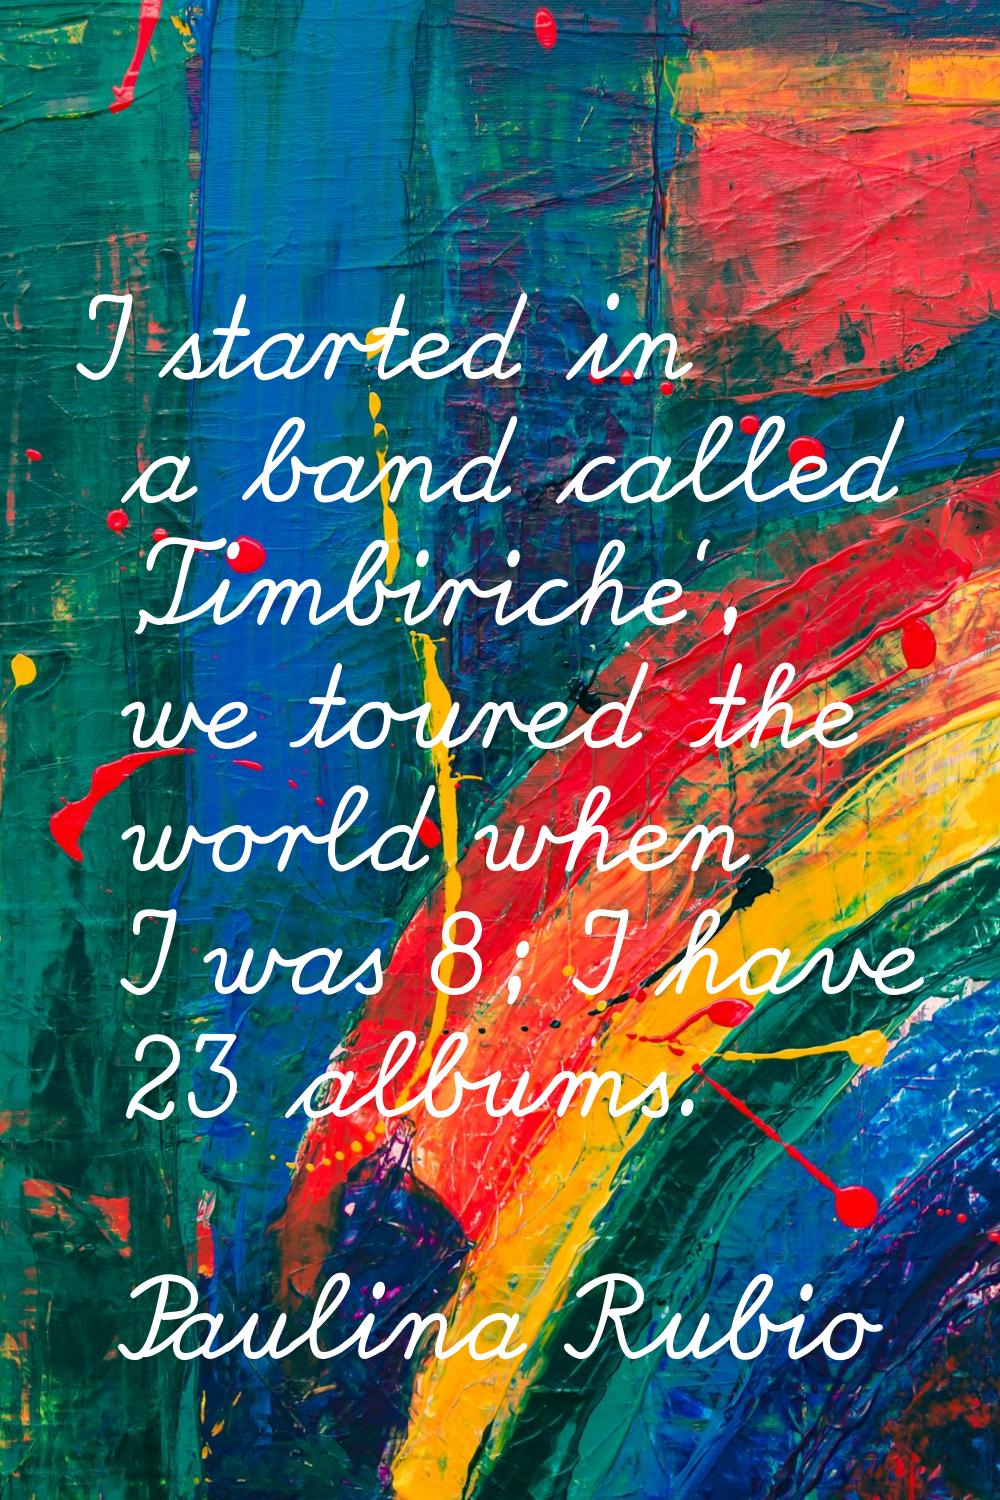 I started in a band called 'Timbiriche', we toured the world when I was 8; I have 23 albums.